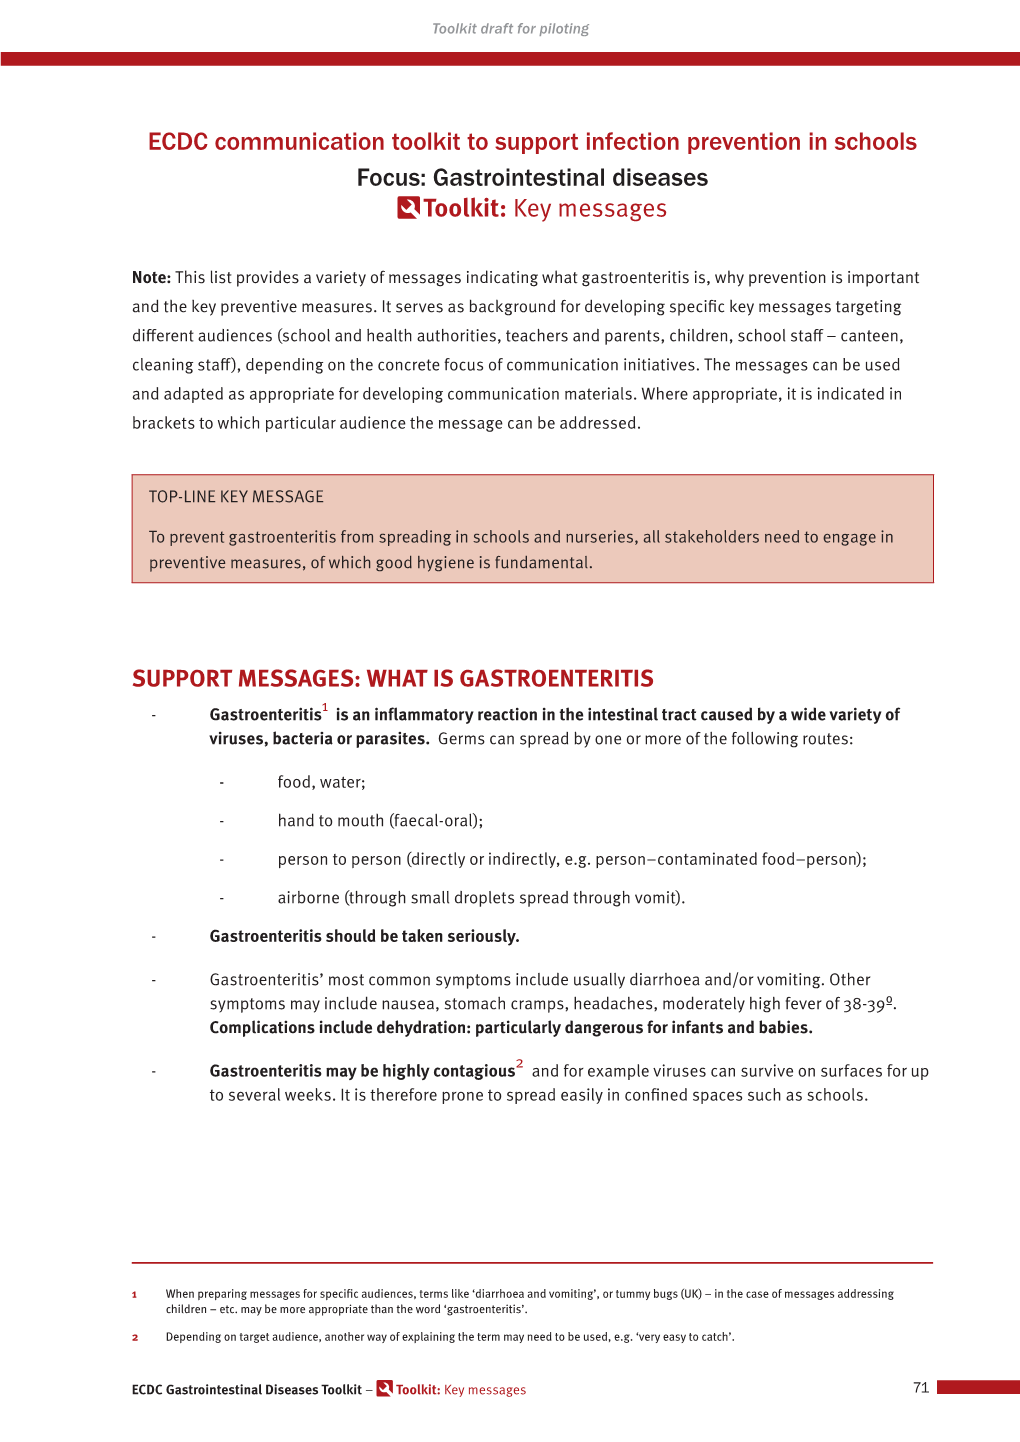 Gastrointestinal Diseases Toolkit: Key Messages